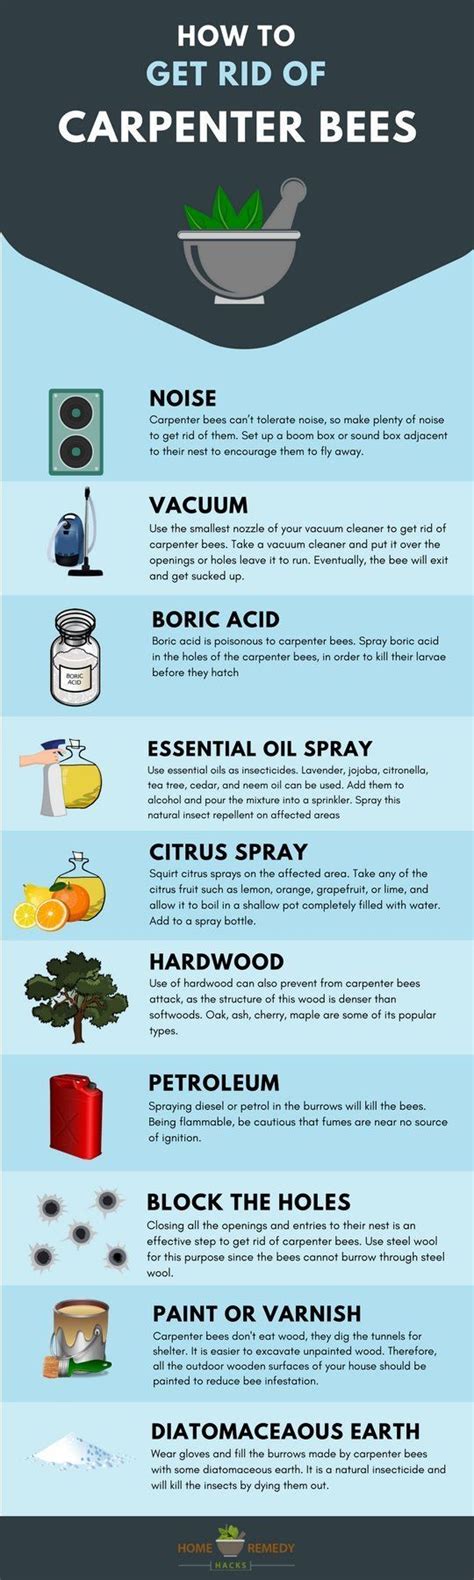 Spray the vinegar solution in and around the nest. 13 Home Remedies to Get Rid of Carpenter Bees | Carpenter ...